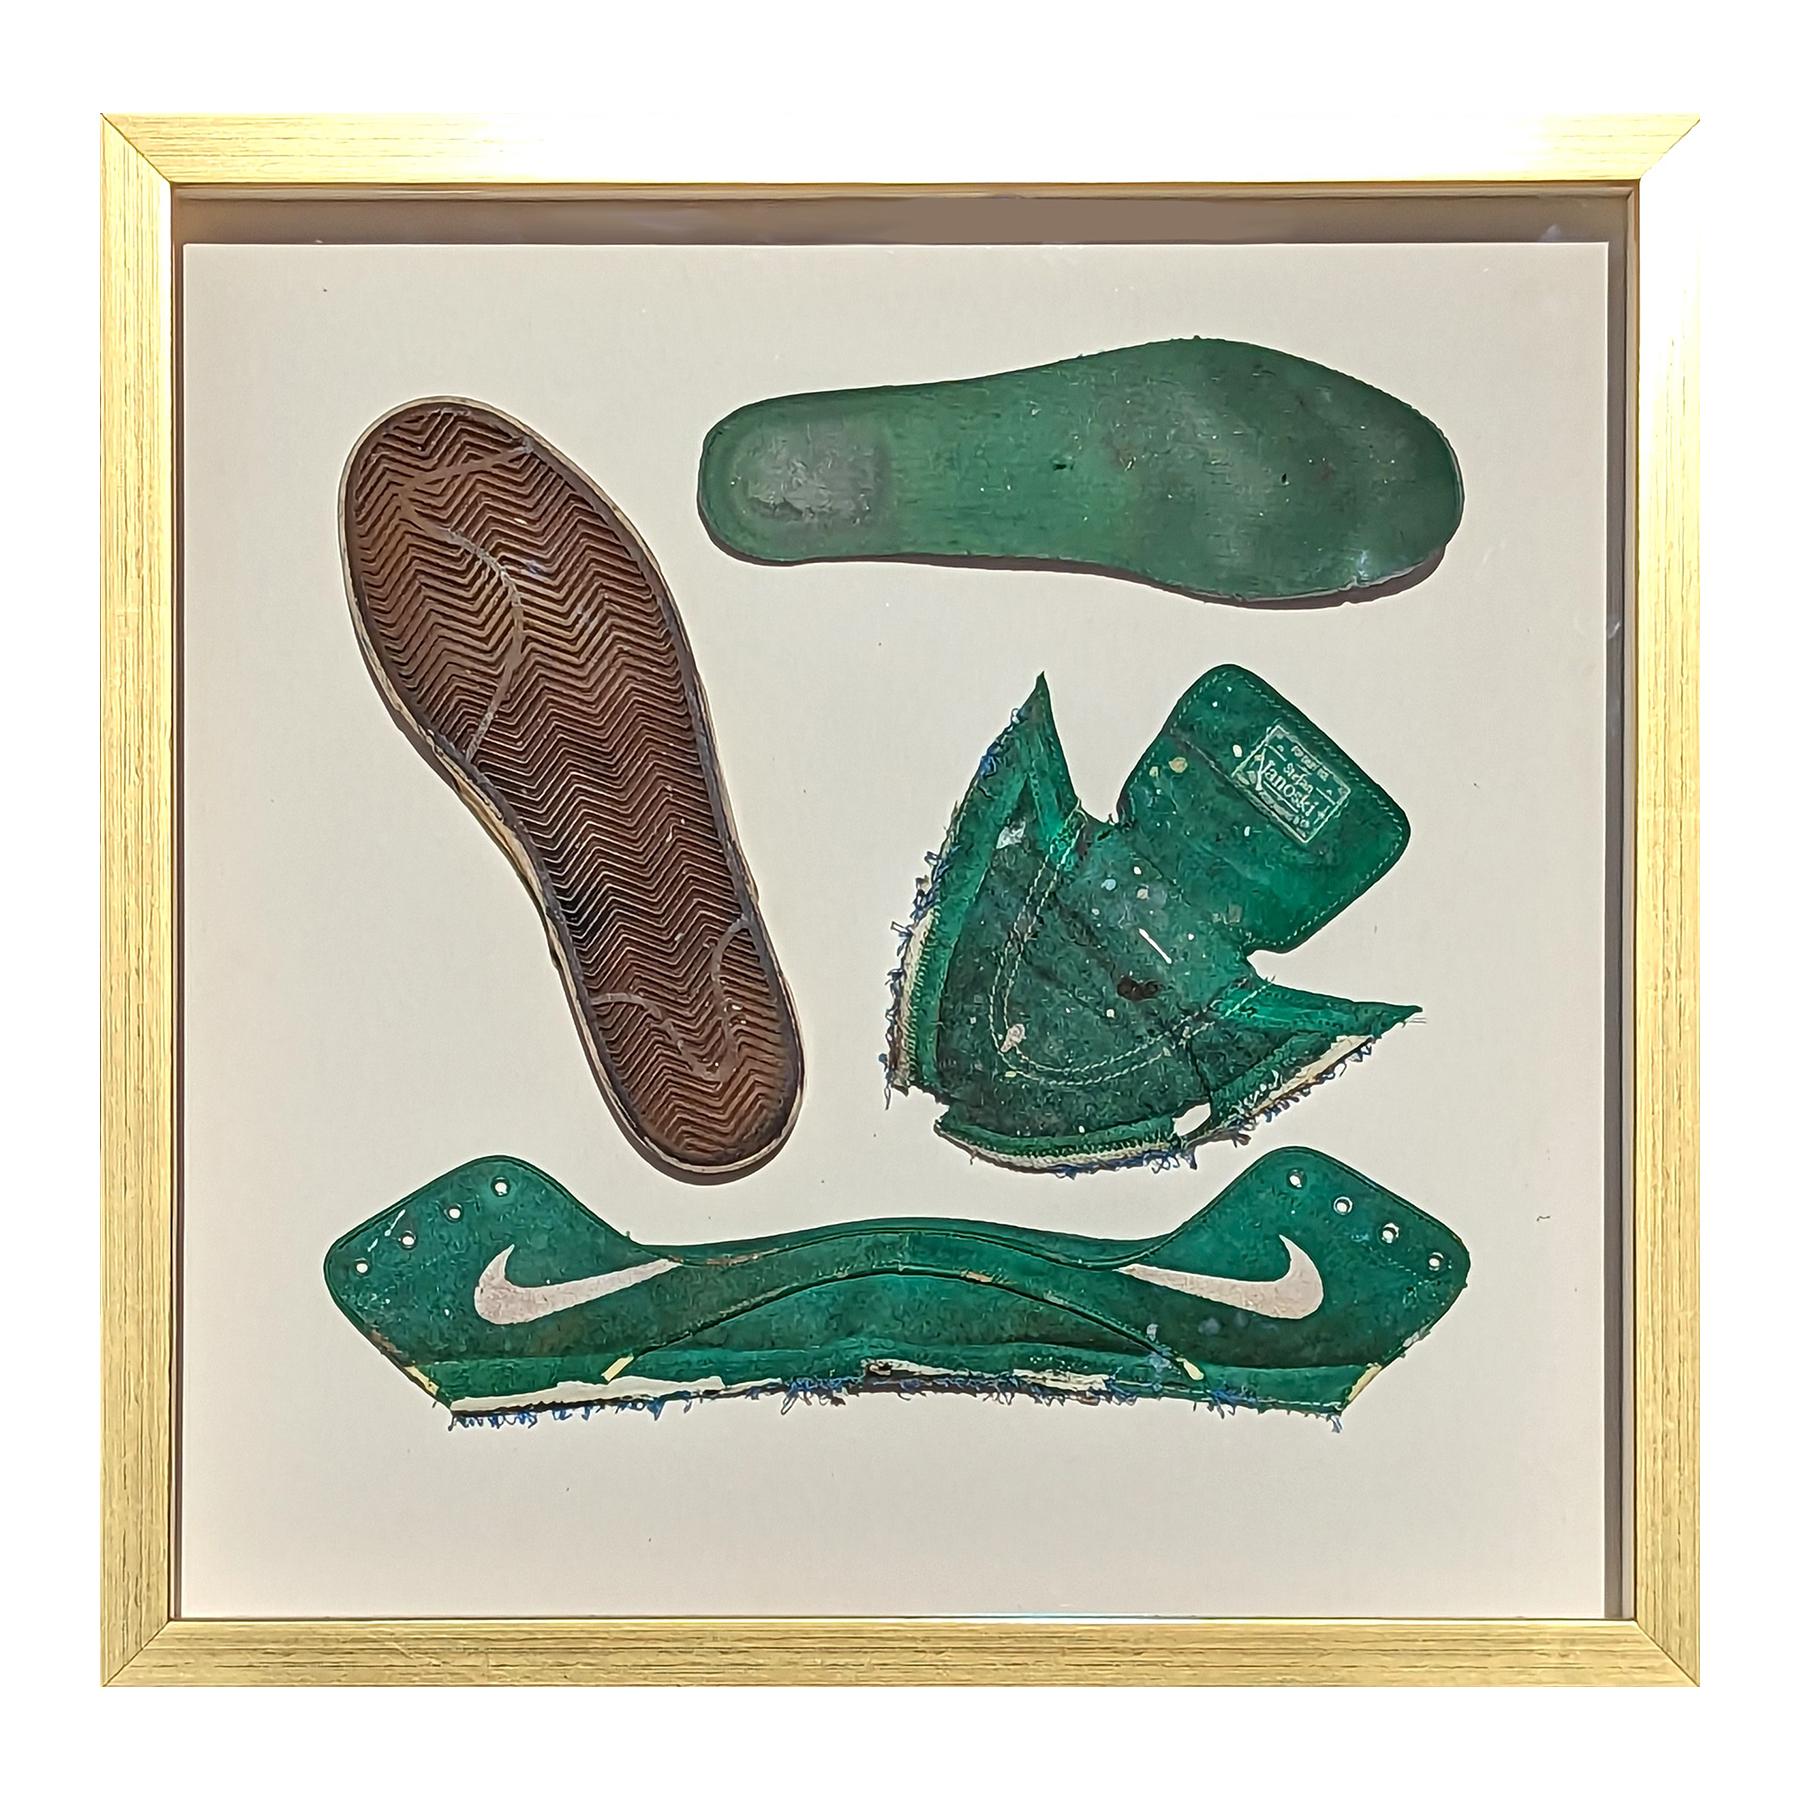 Contemporary Deconstructed Mixed Media & Found Object Green Shoe Painting - Sculpture by Tra' Slaughter